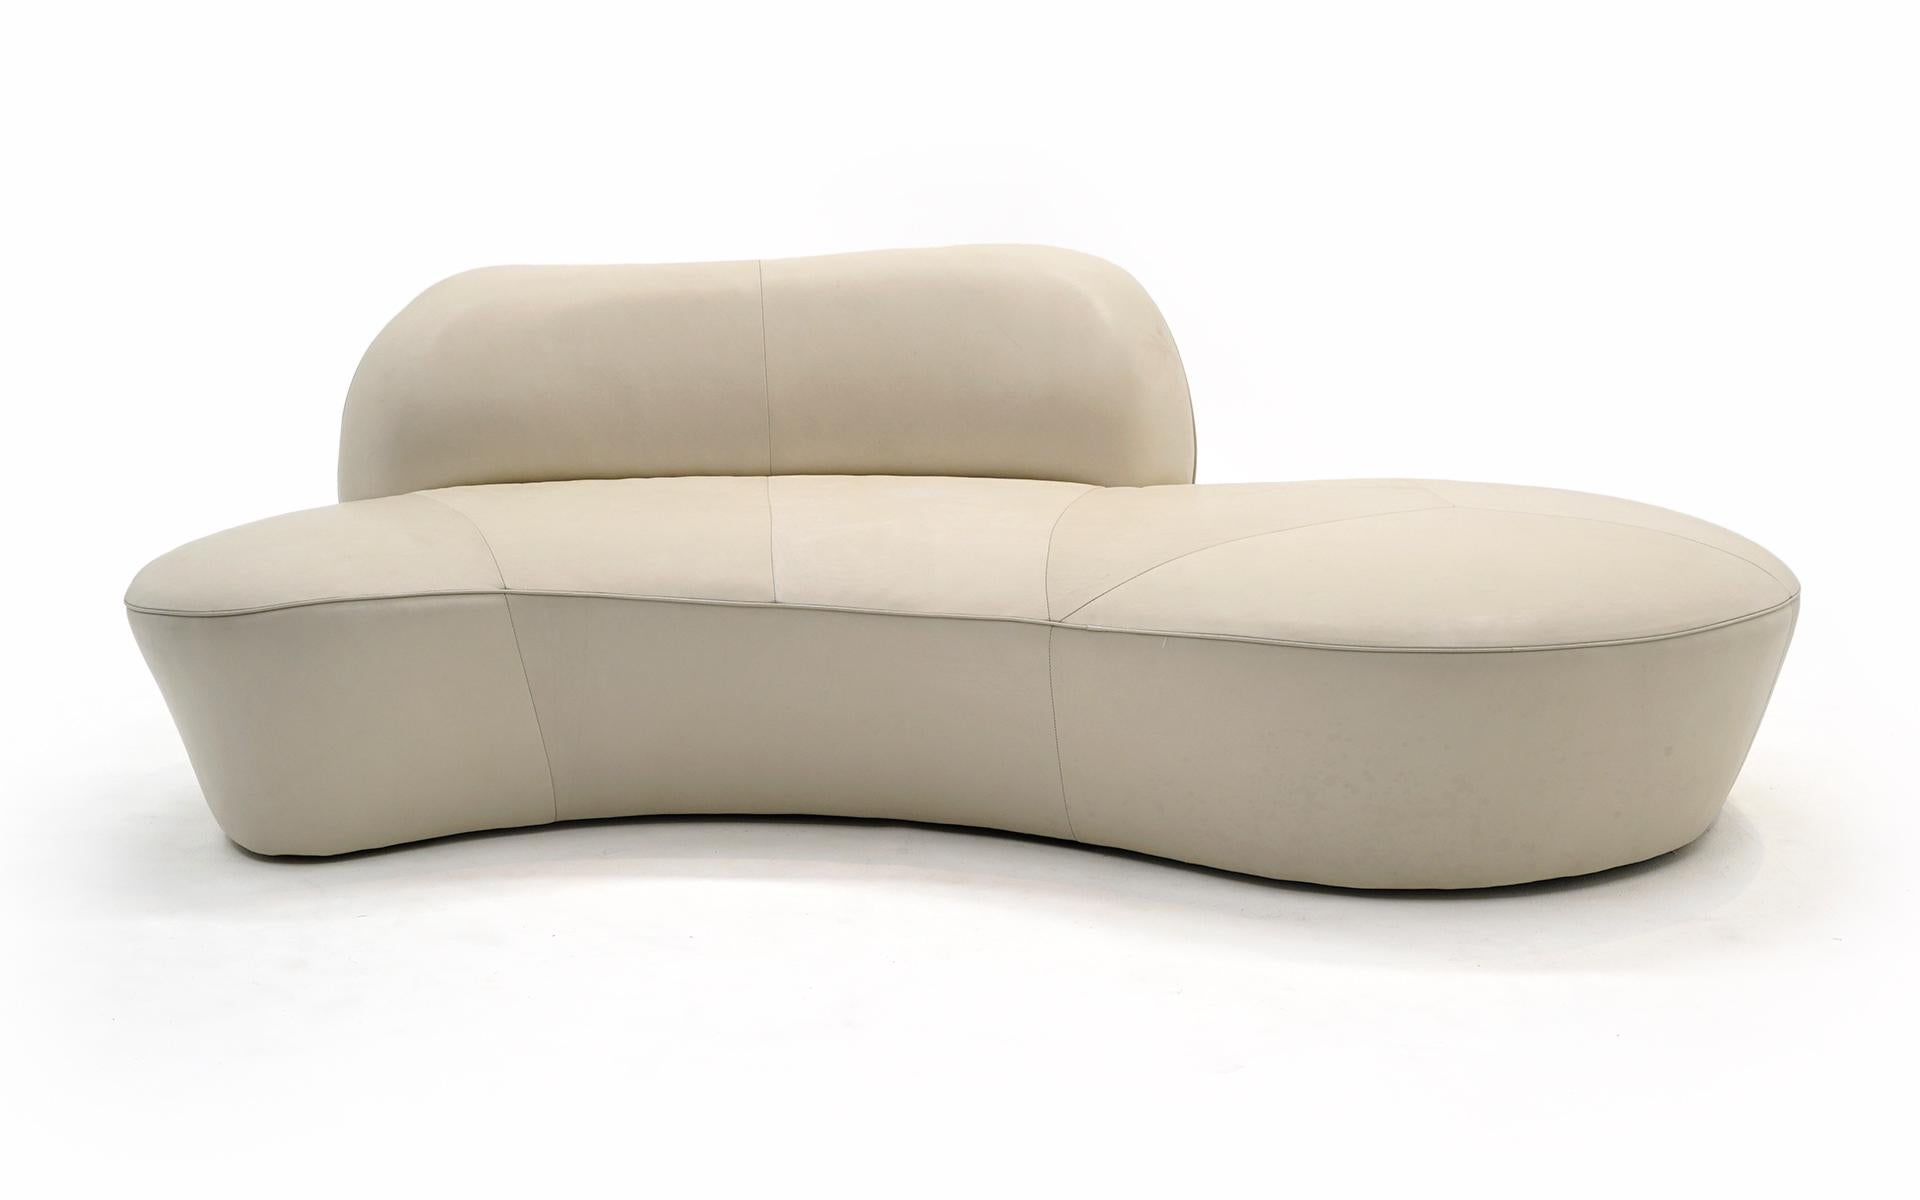 Set of two, mirror image, Ivory leather Zoe cloud sofas designed by Vladimir Kagan for American Leather. These were manufactured in 2009 and have had very little use. We have tried to make any blemishes obvious in the photos. There are no tears,